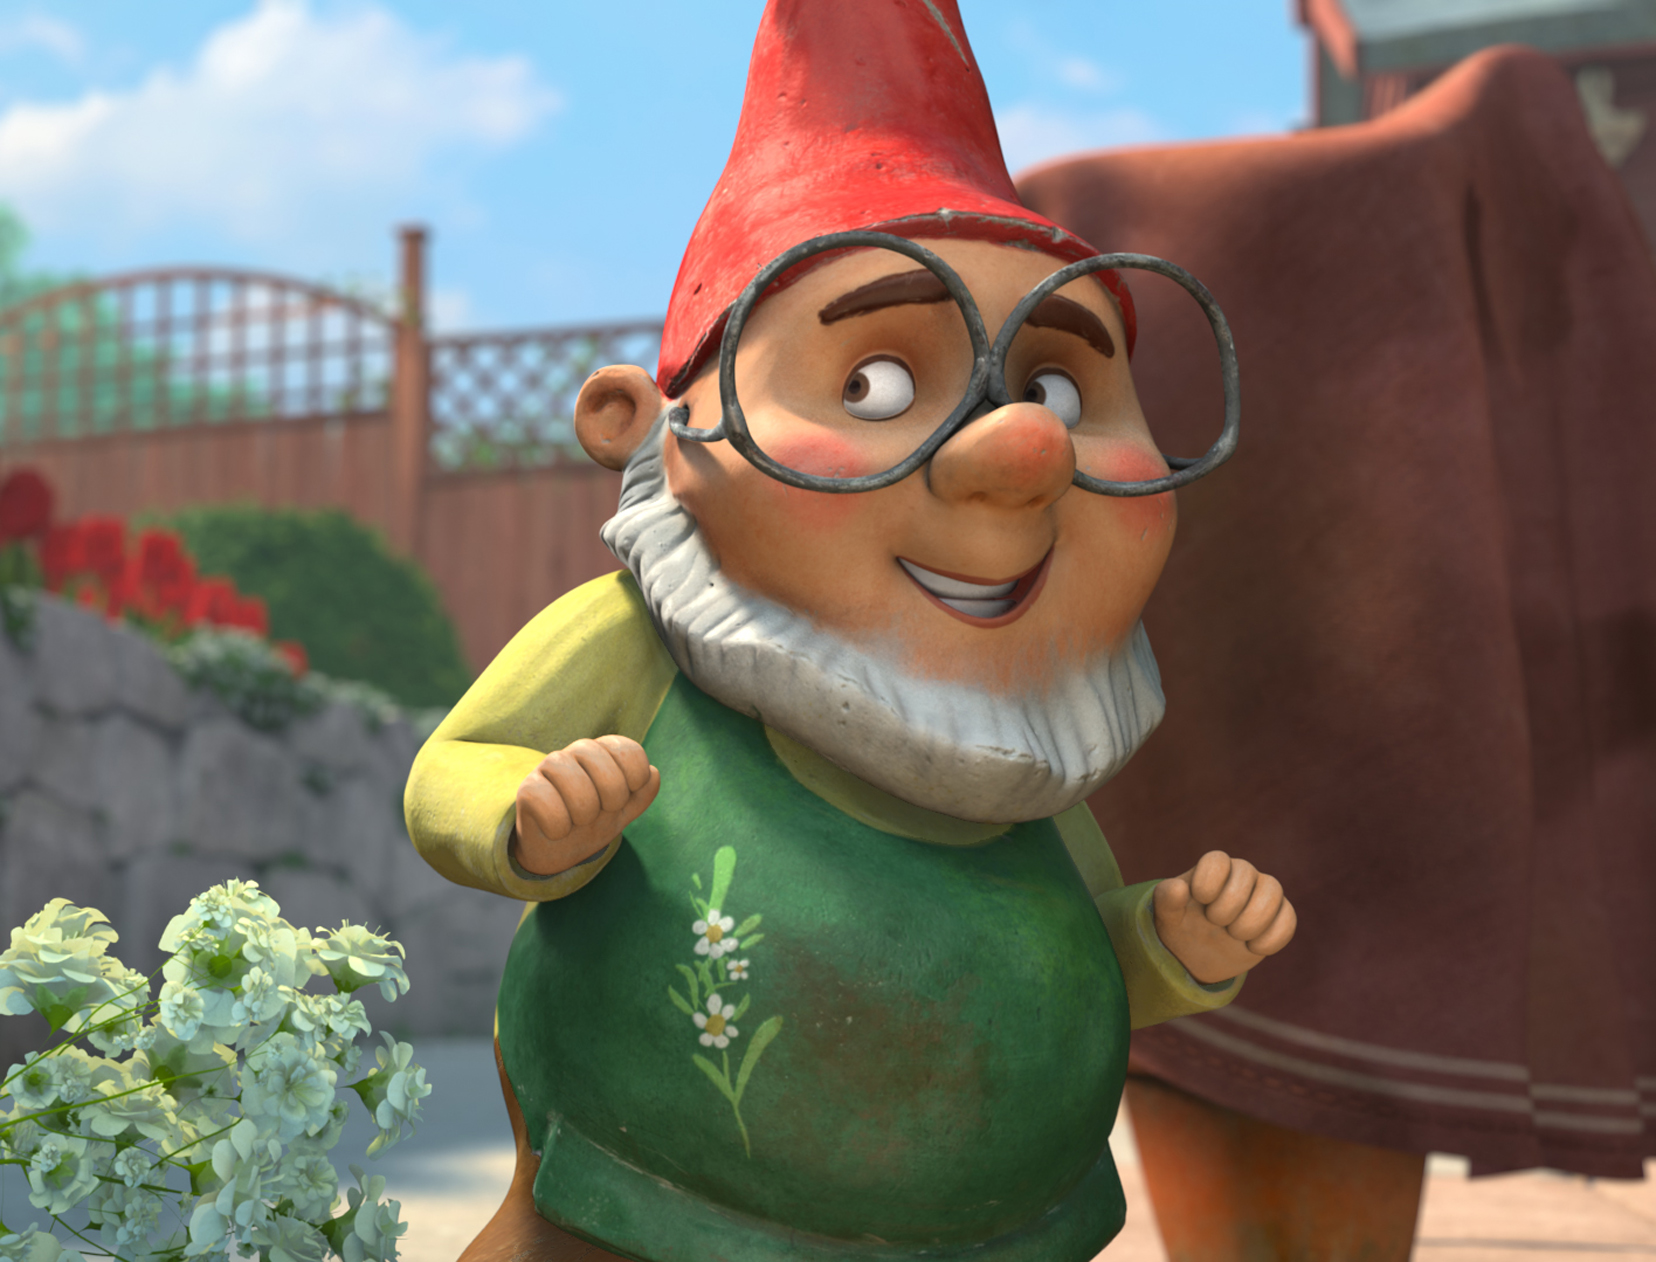 Gnomeo & Juliet Backgrounds on Wallpapers Vista